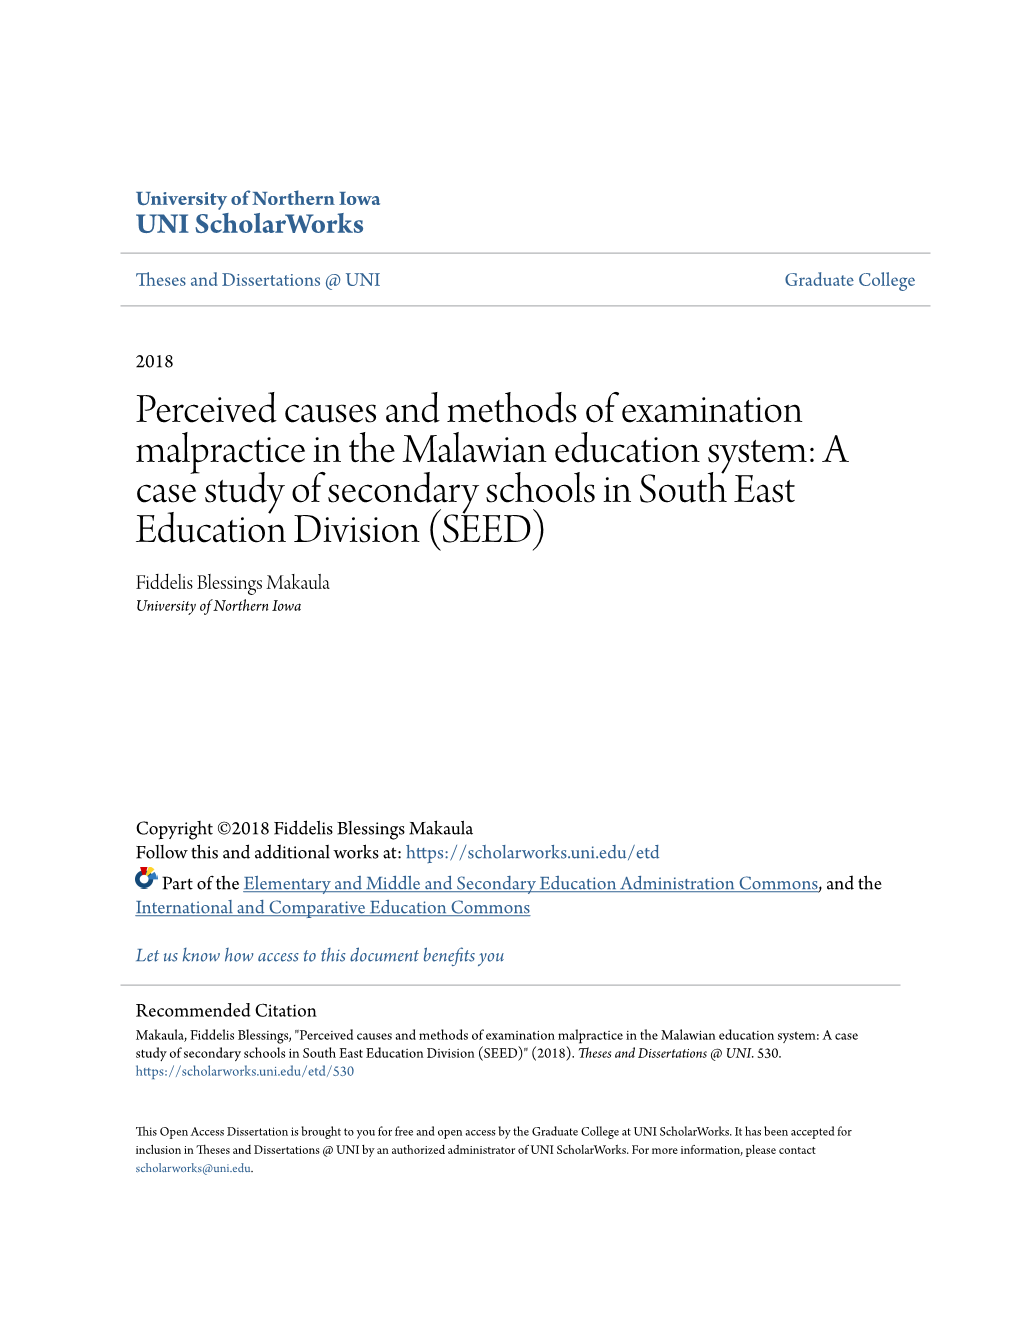 Perceived Causes and Methods of Examination Malpractice in the Malawian Education System: a Case Study of Secondary Schools in S